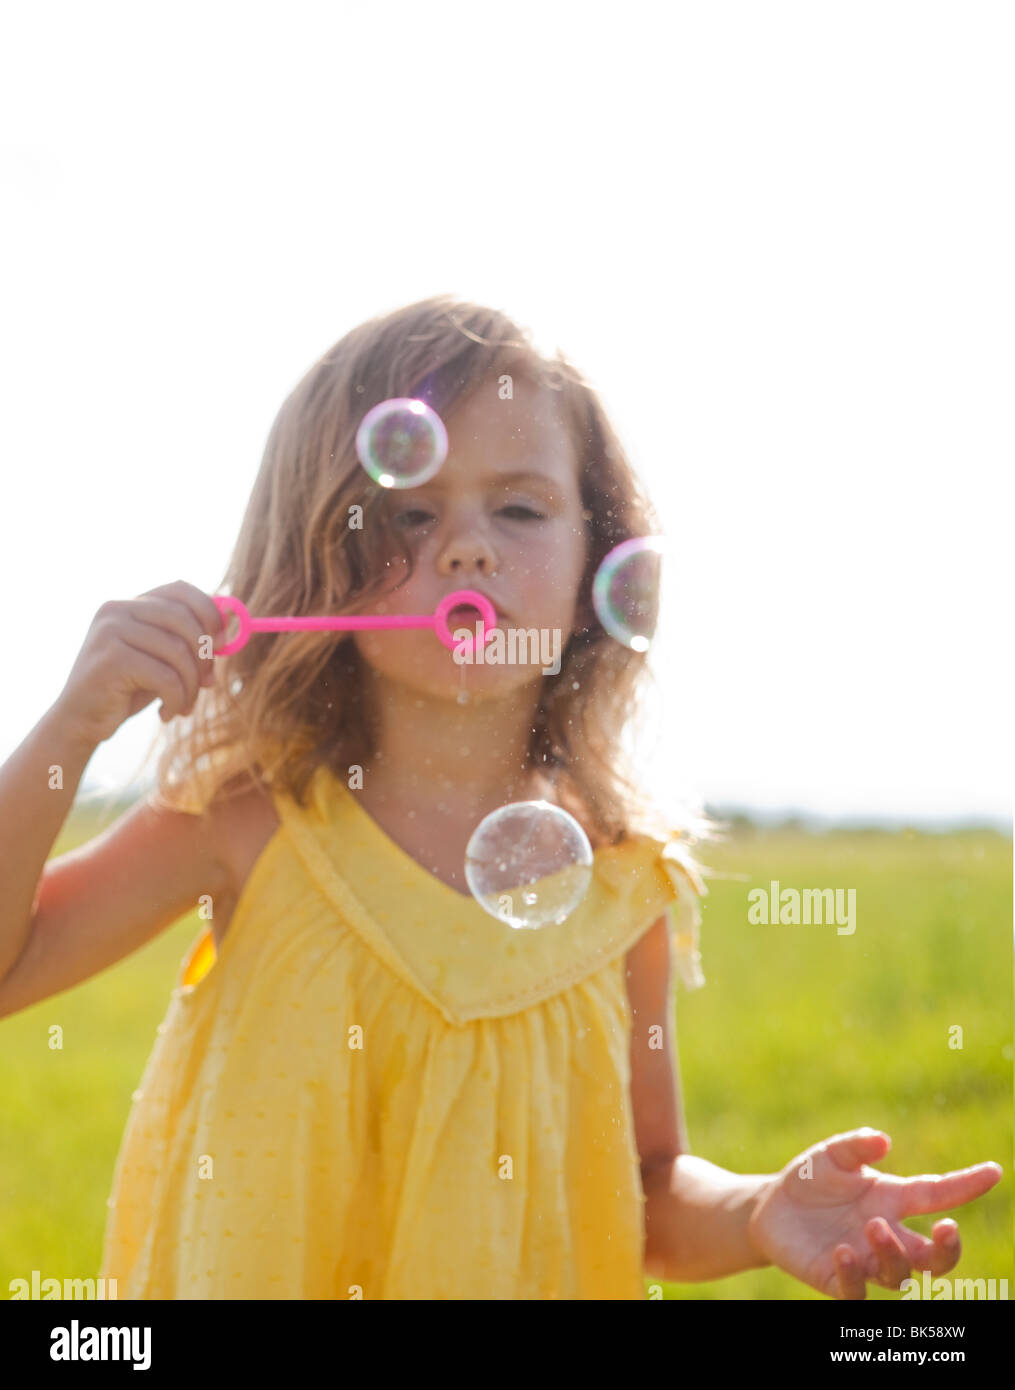 Young girl in yellow sundress blowing bubbles Stock Photo